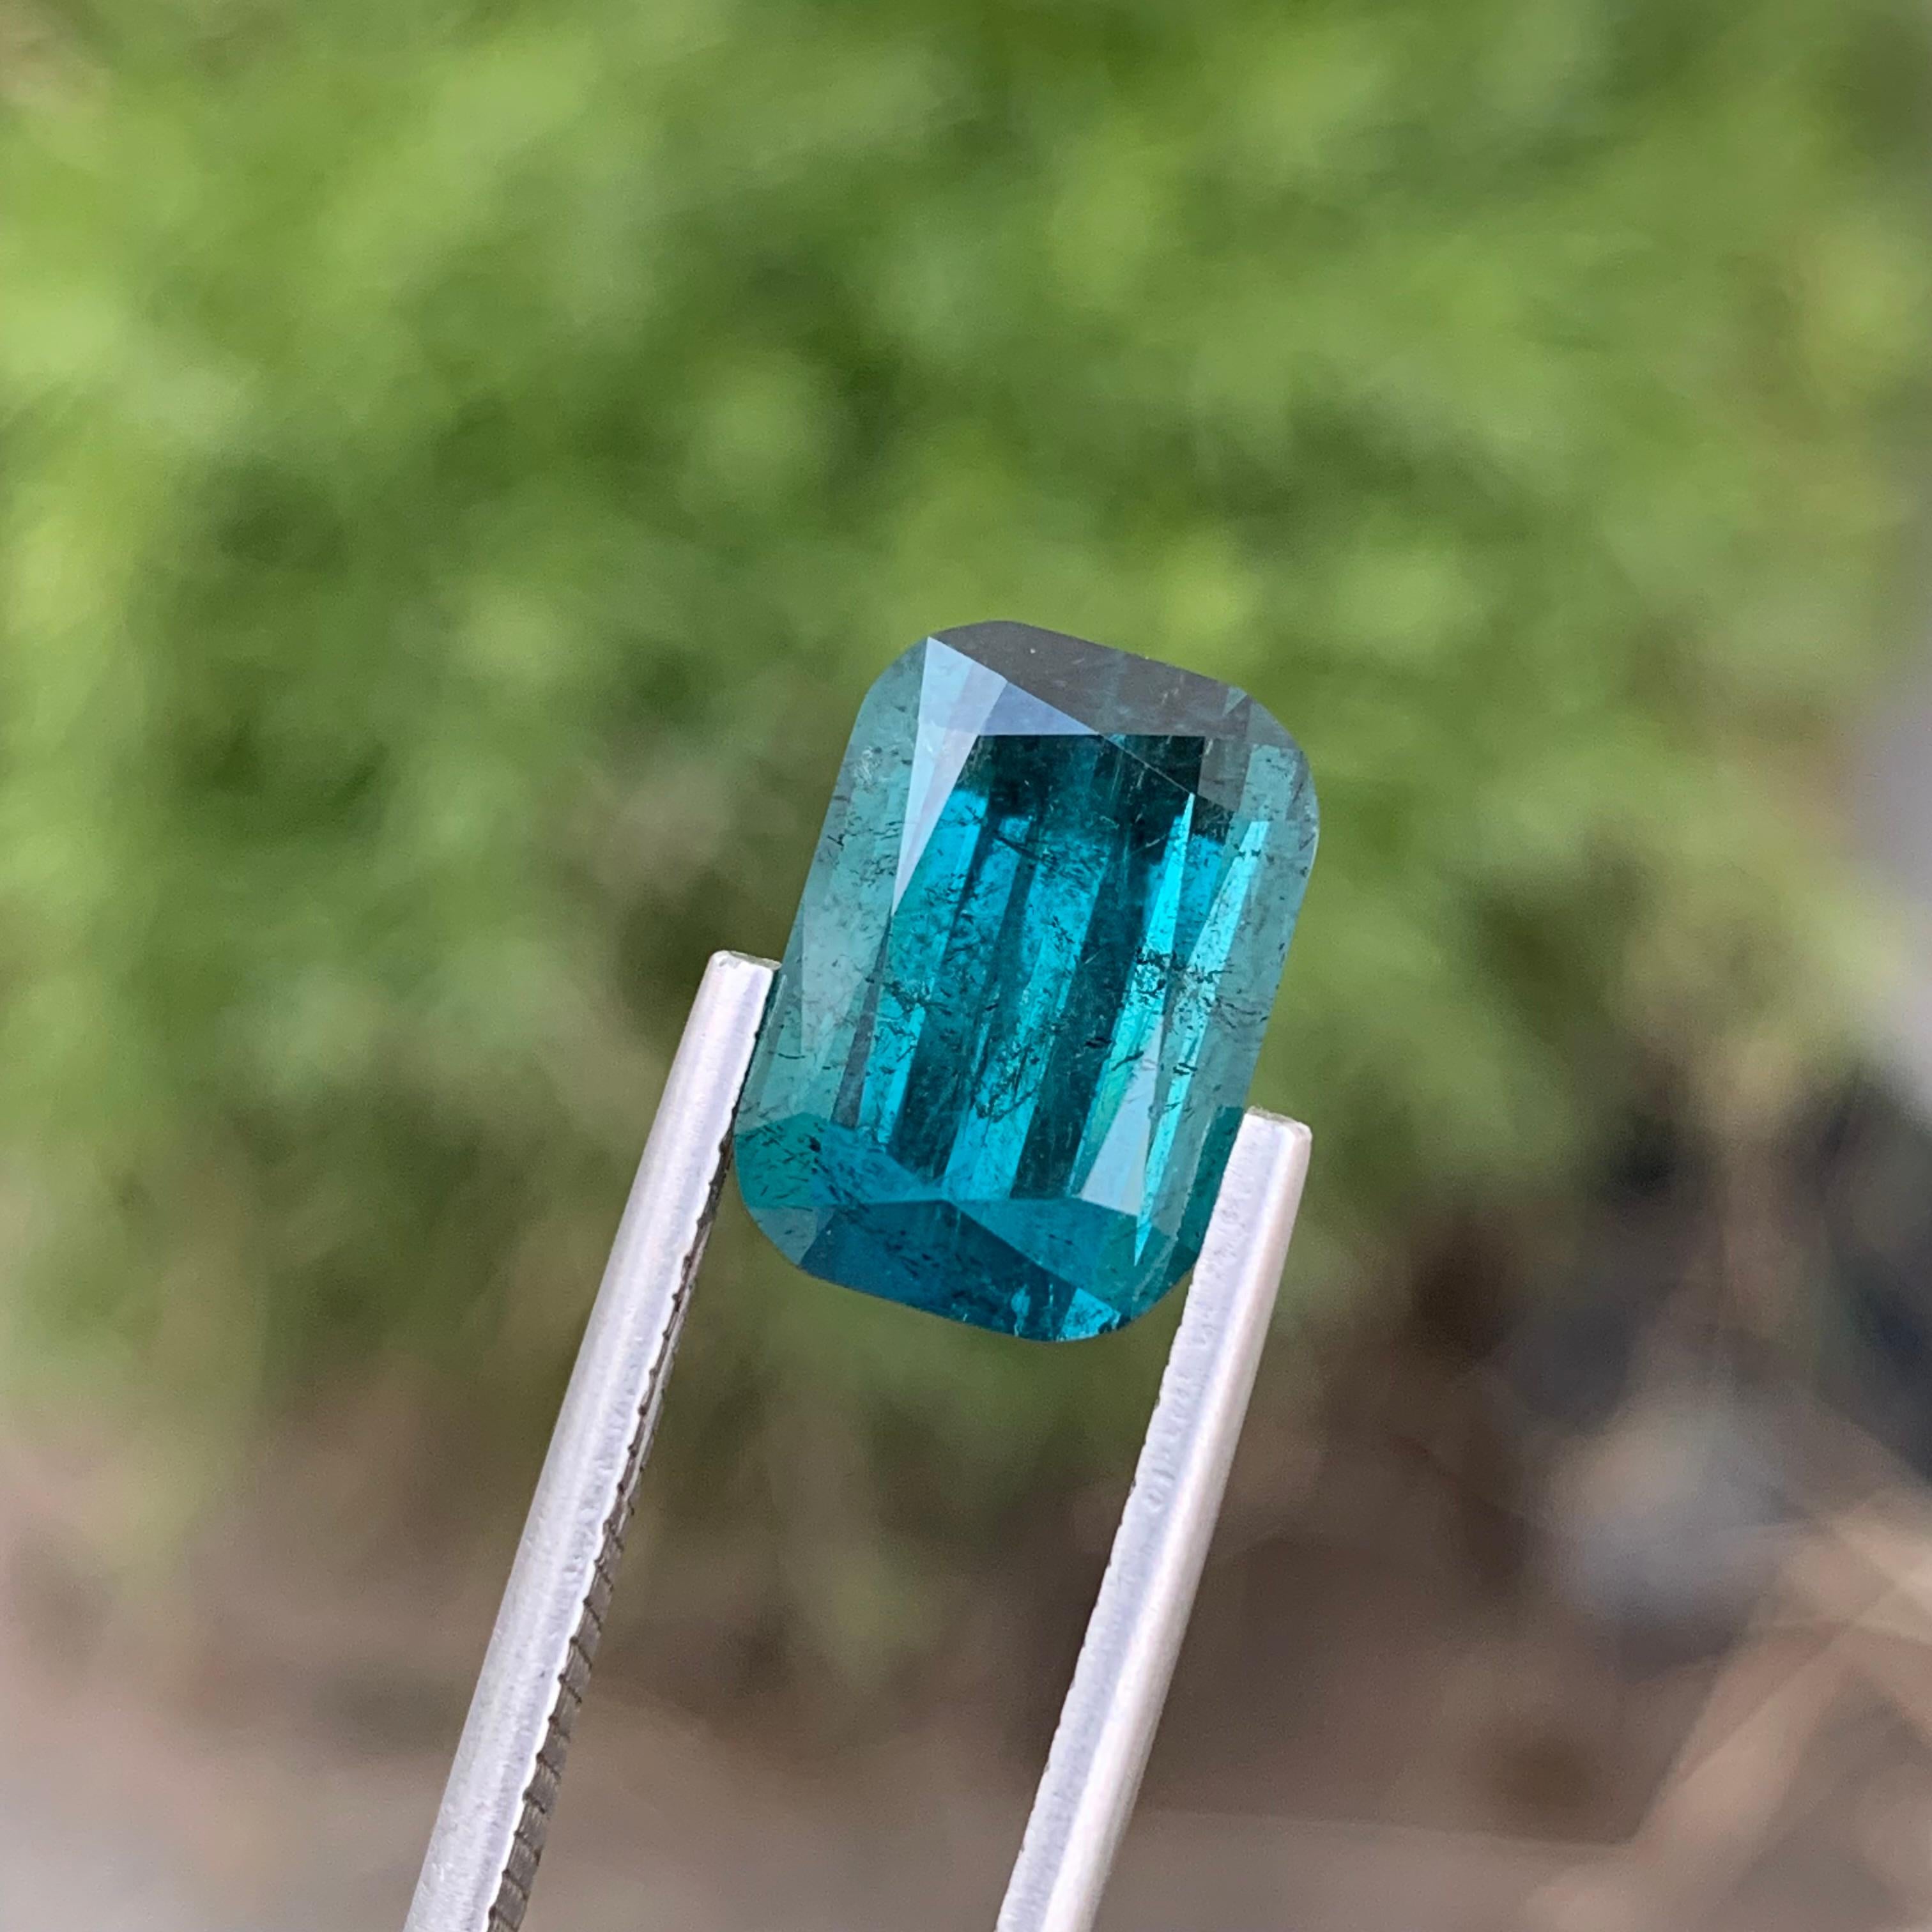 Loose Indicolite Tourmaline 
Weight: 7.90 Carats 
Dimension: 12.9x9x7.6 Mm
Origin: Kunar Afghanistan 
Shape: Cushion
Color: Deep Blue
Treatment: Non
Clarity: Small Included
Certificate: On Demand 
Indicolite tourmaline, a captivating variety of